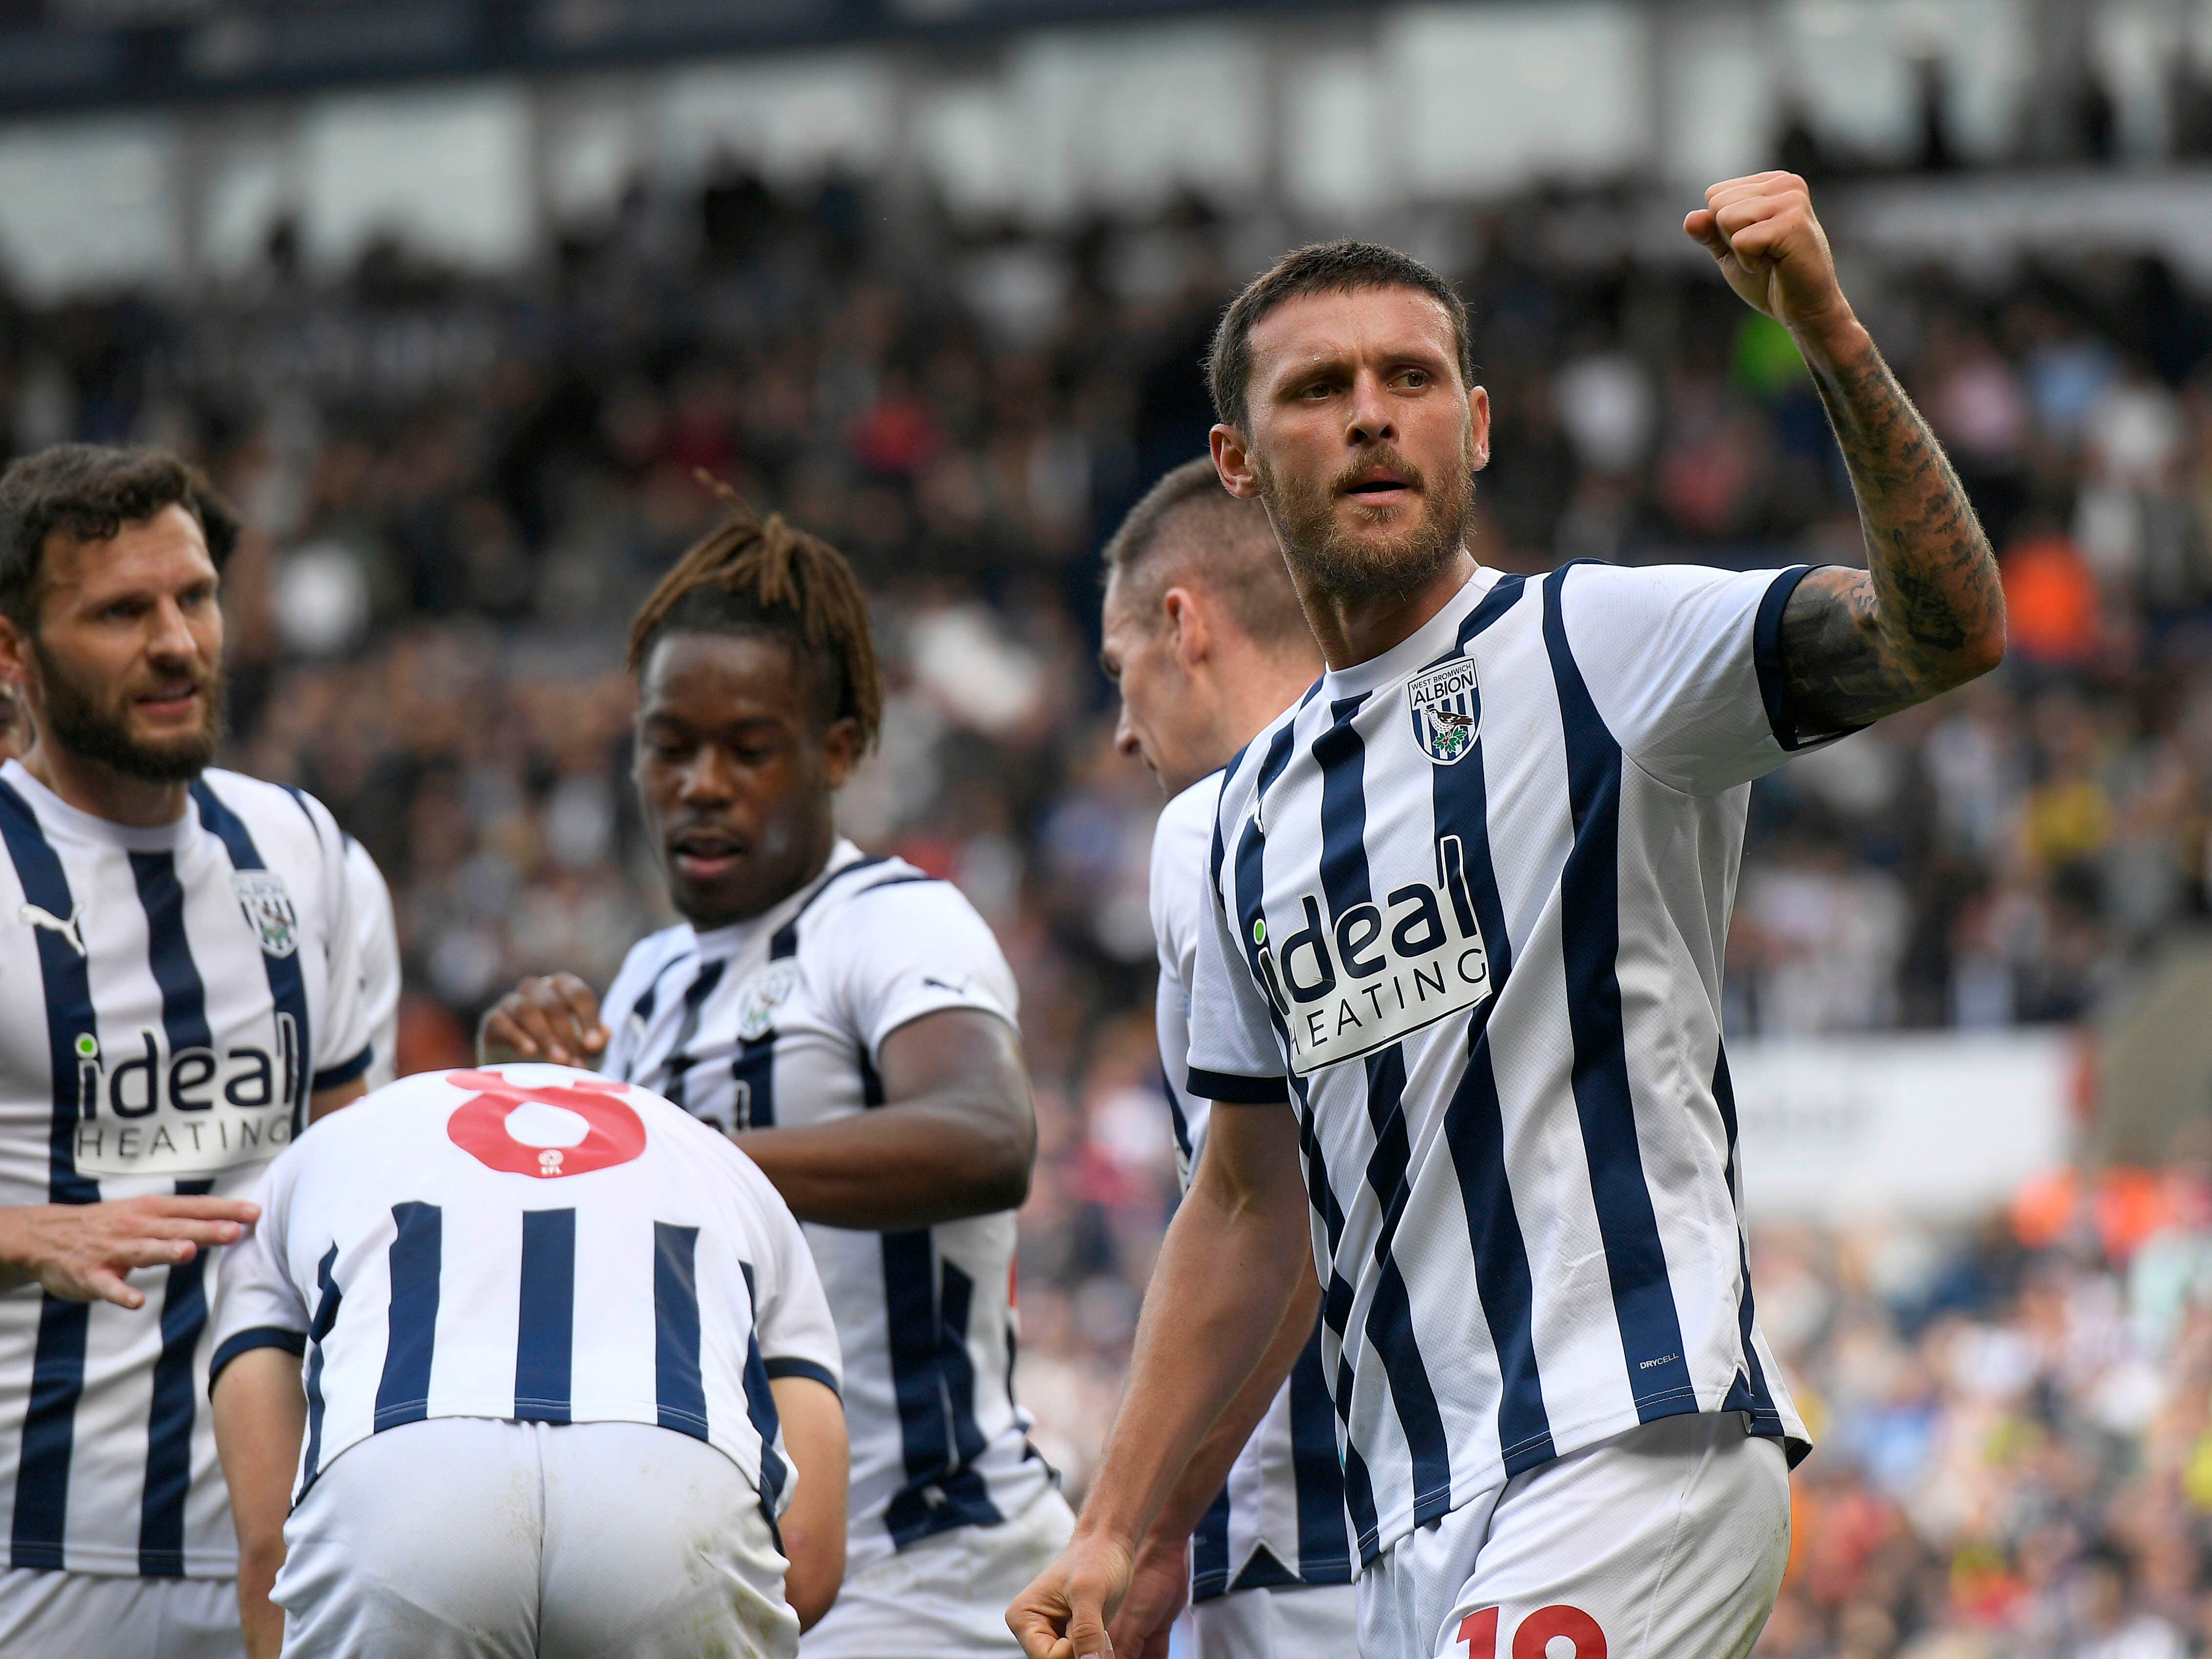 West Brom 4 Middlesbrough 2 - Report 